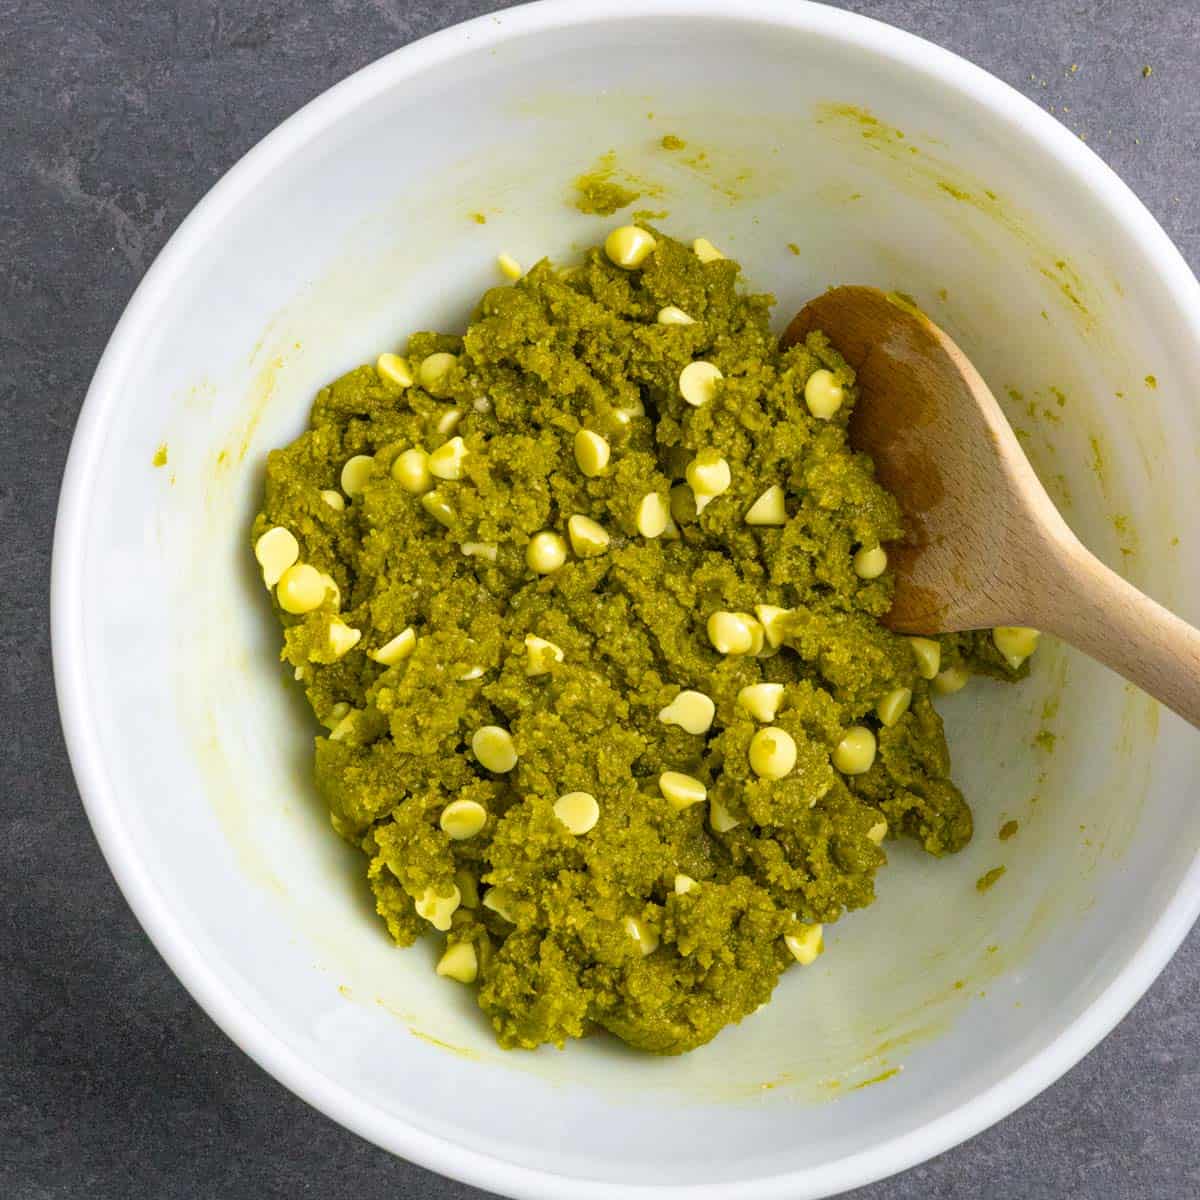 Mixed green cookie dough after adding white chocolate chips and mixing well in a white bowl with a wooden spoon.